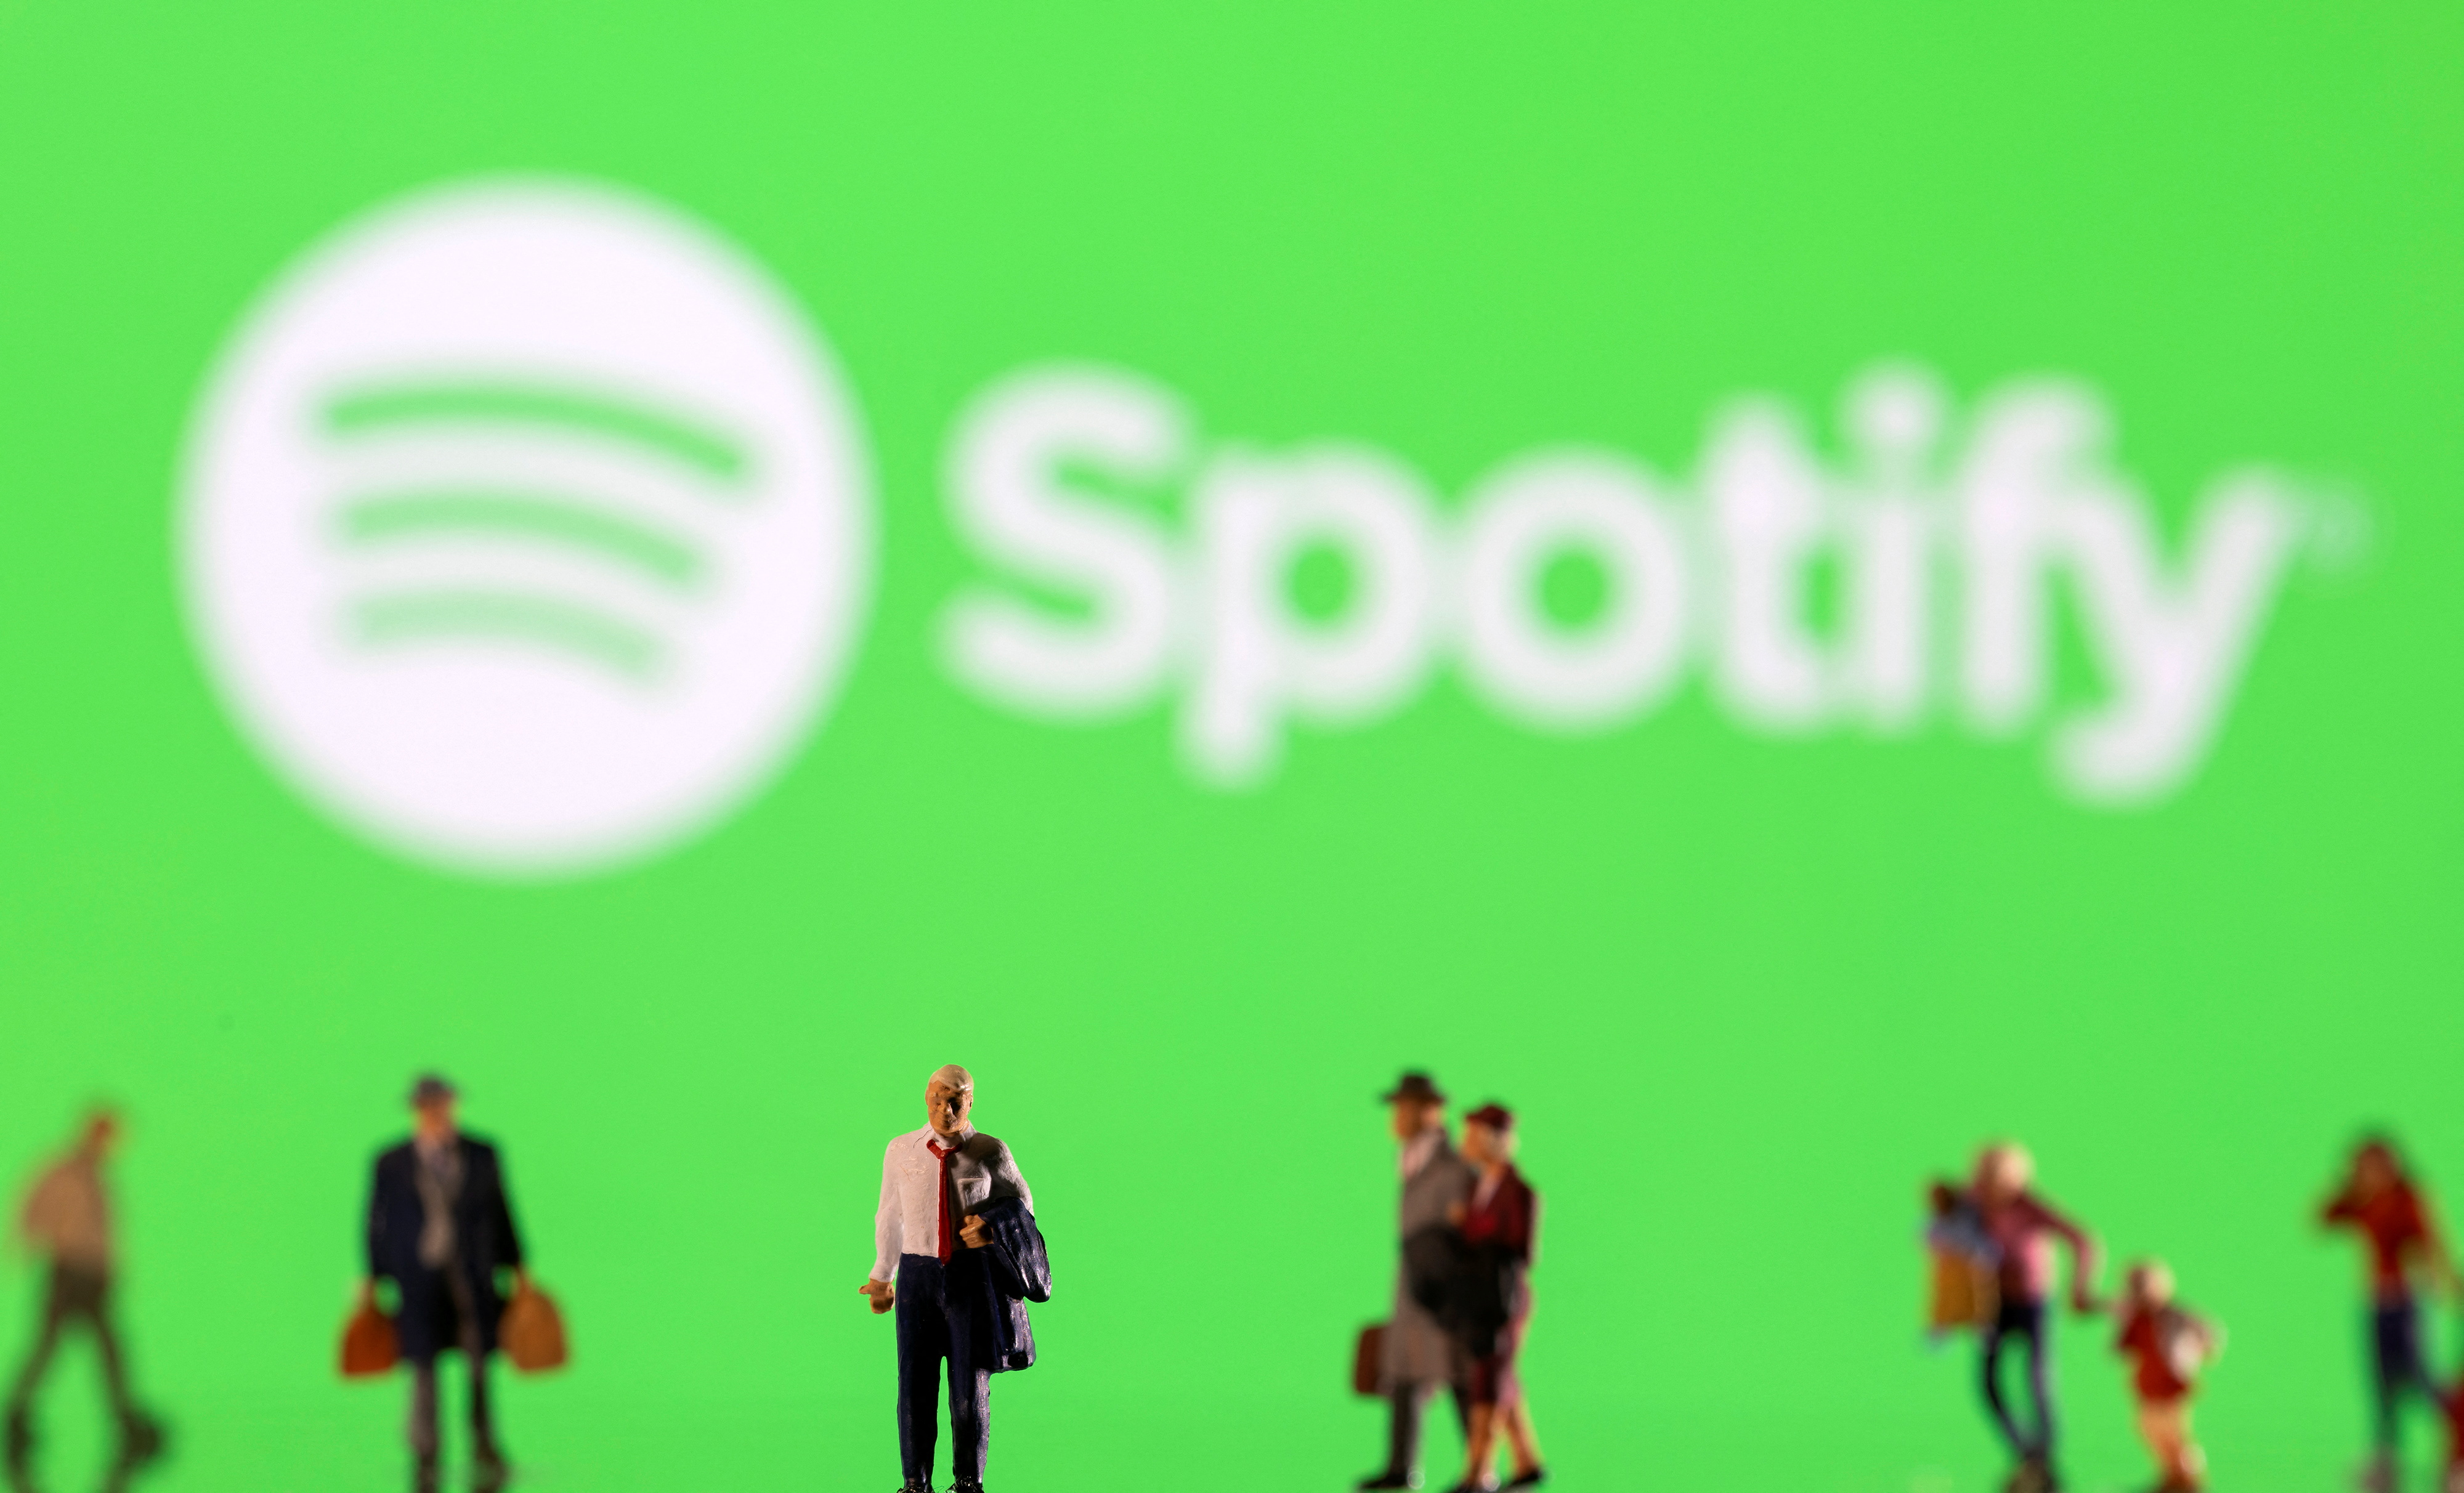 Millions of users use Spotify around the world (Photo: REUTERS/Dado Ruvic/Illustration)